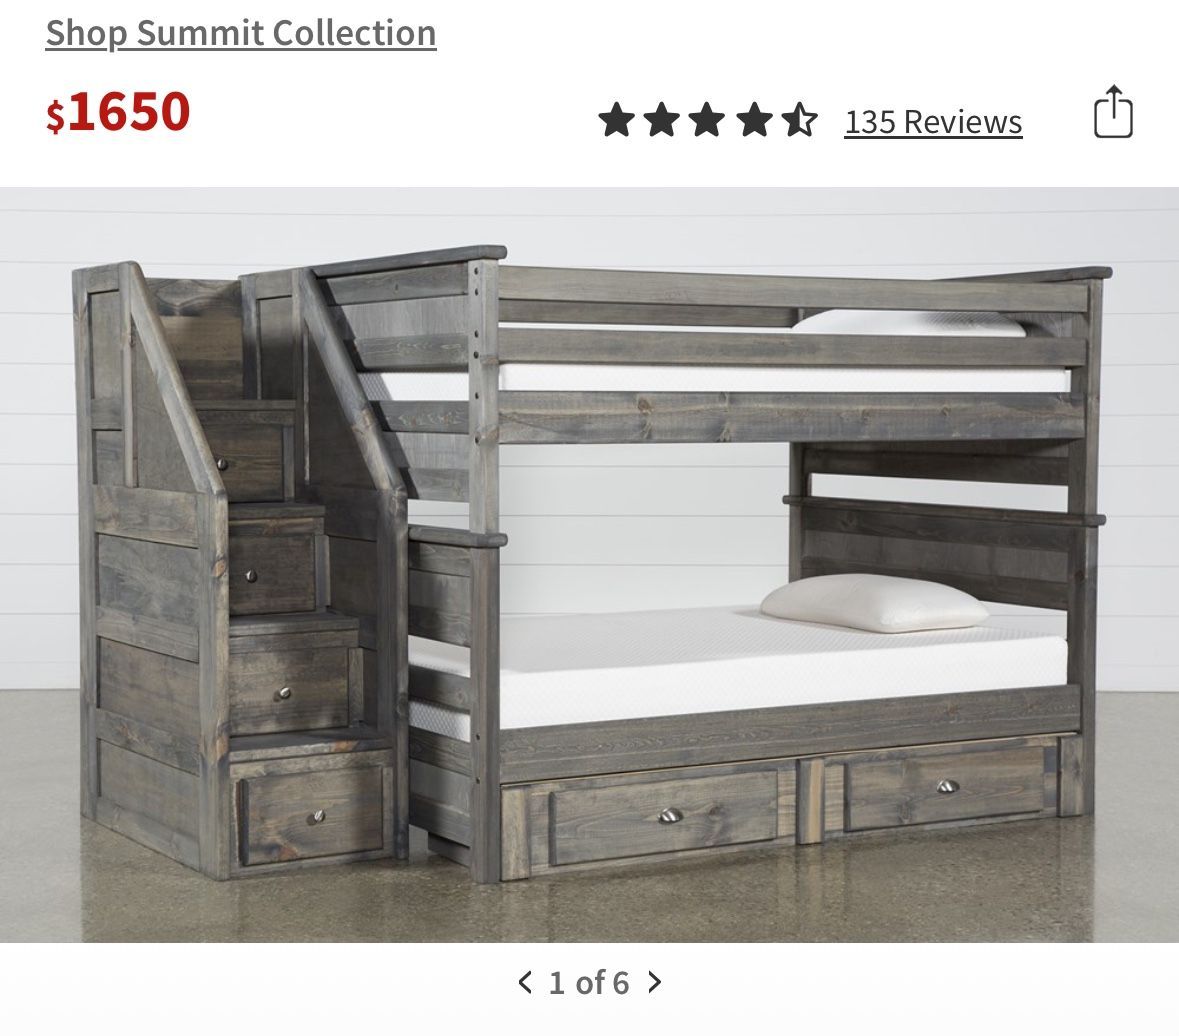 Full Size Bunk Beds 